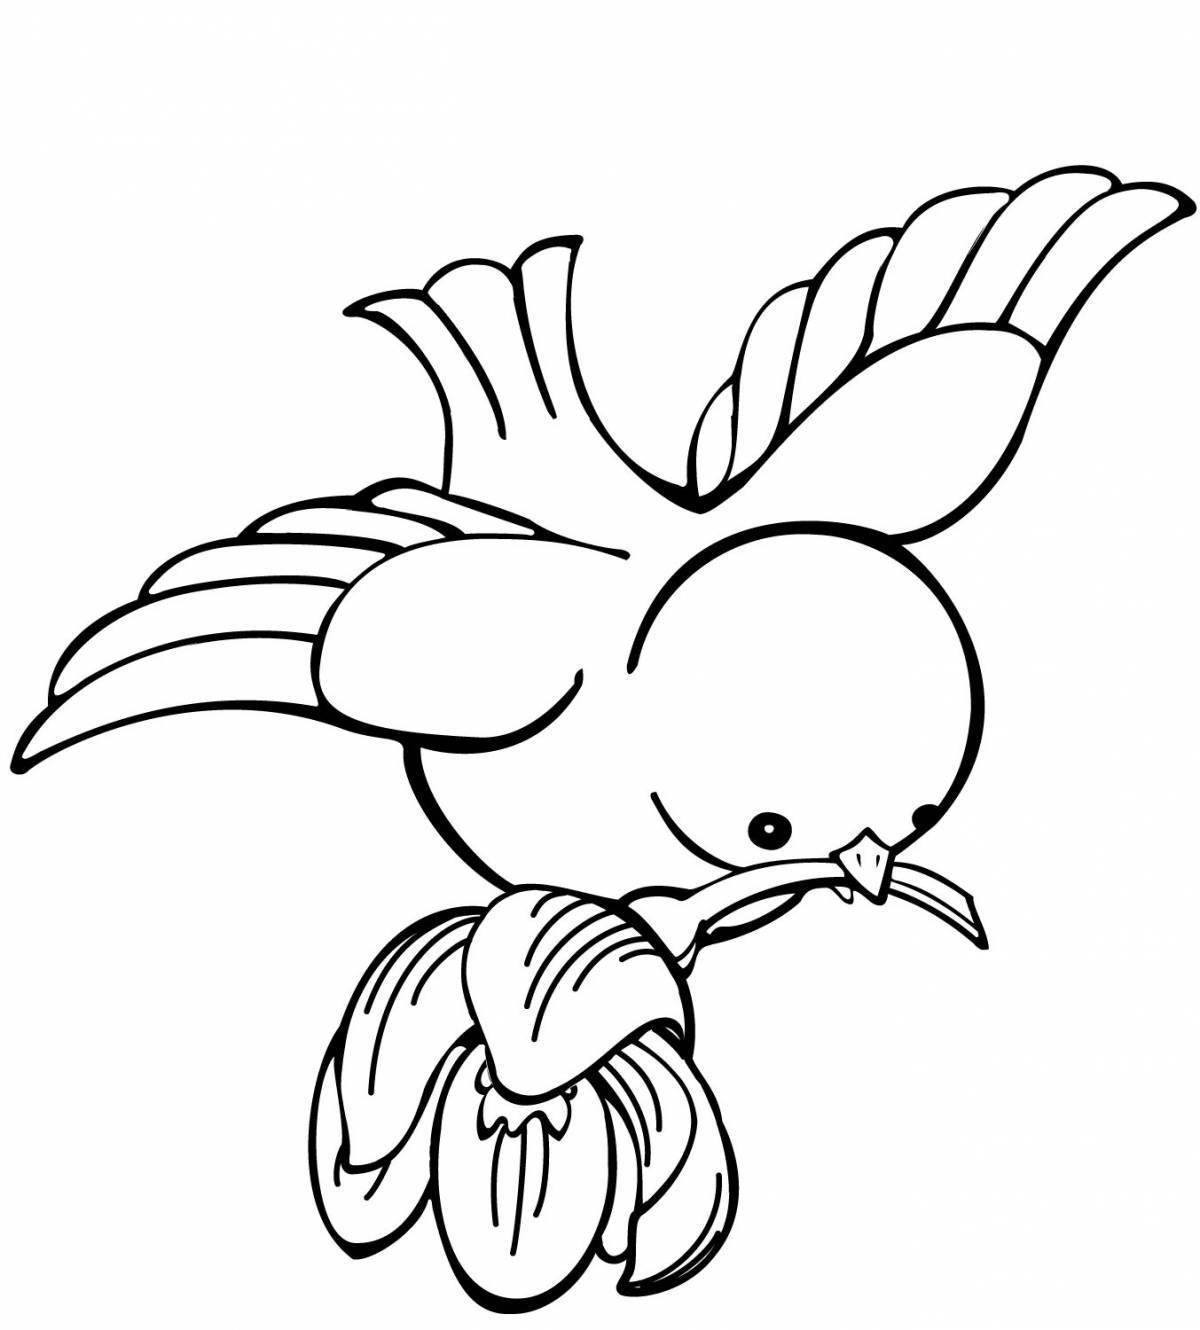 Awesome bird coloring book